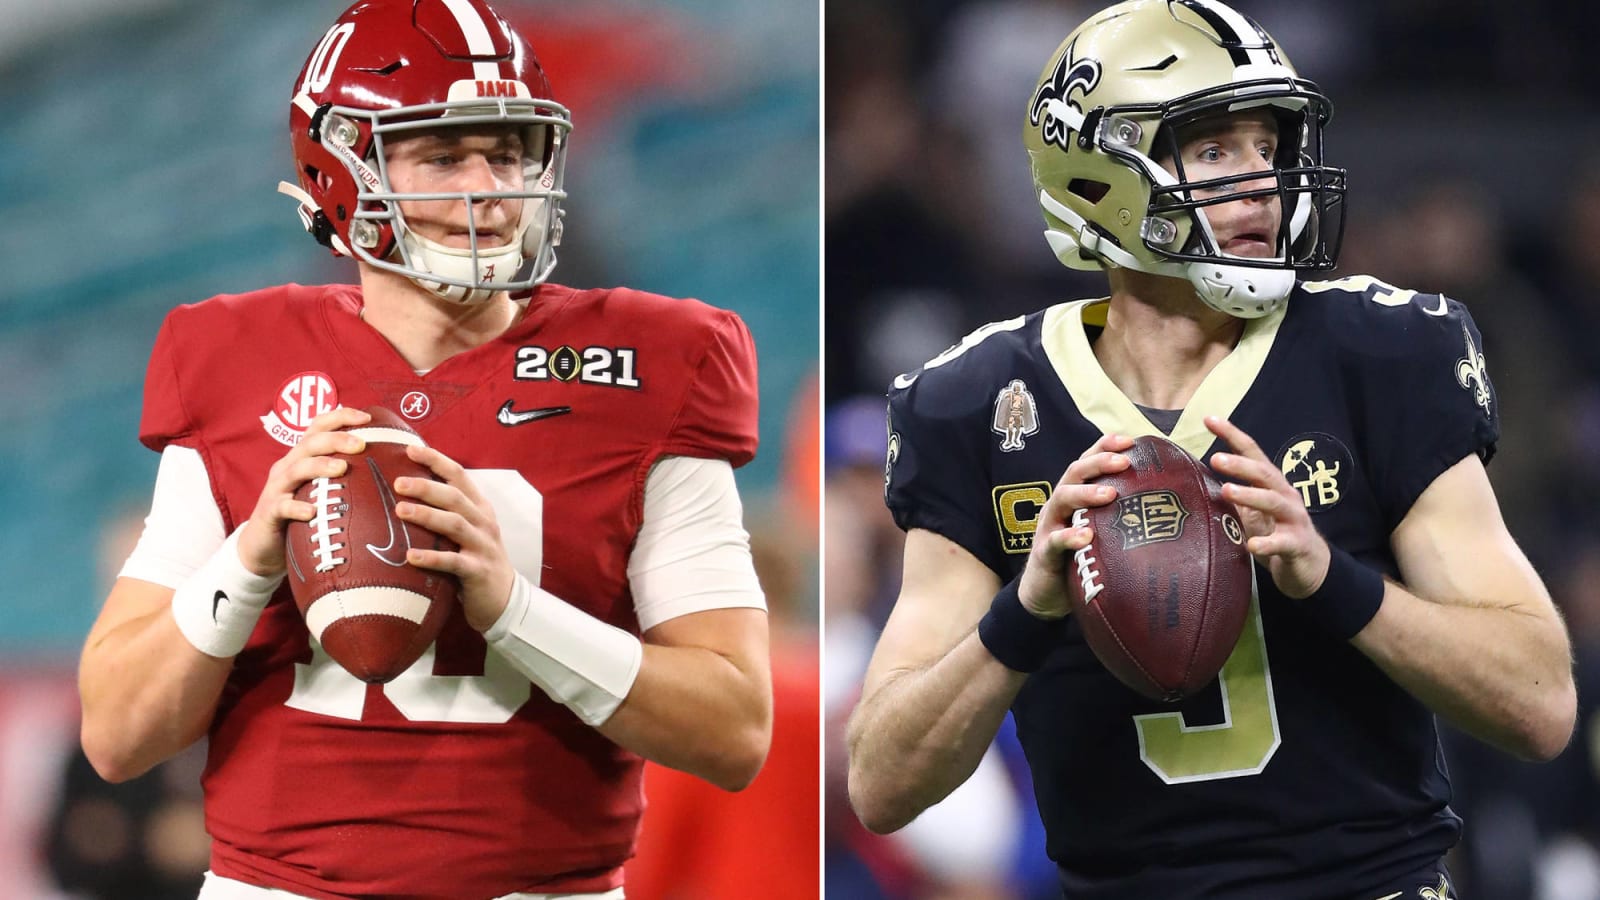 2021 NFL Draft prospects and their league comps